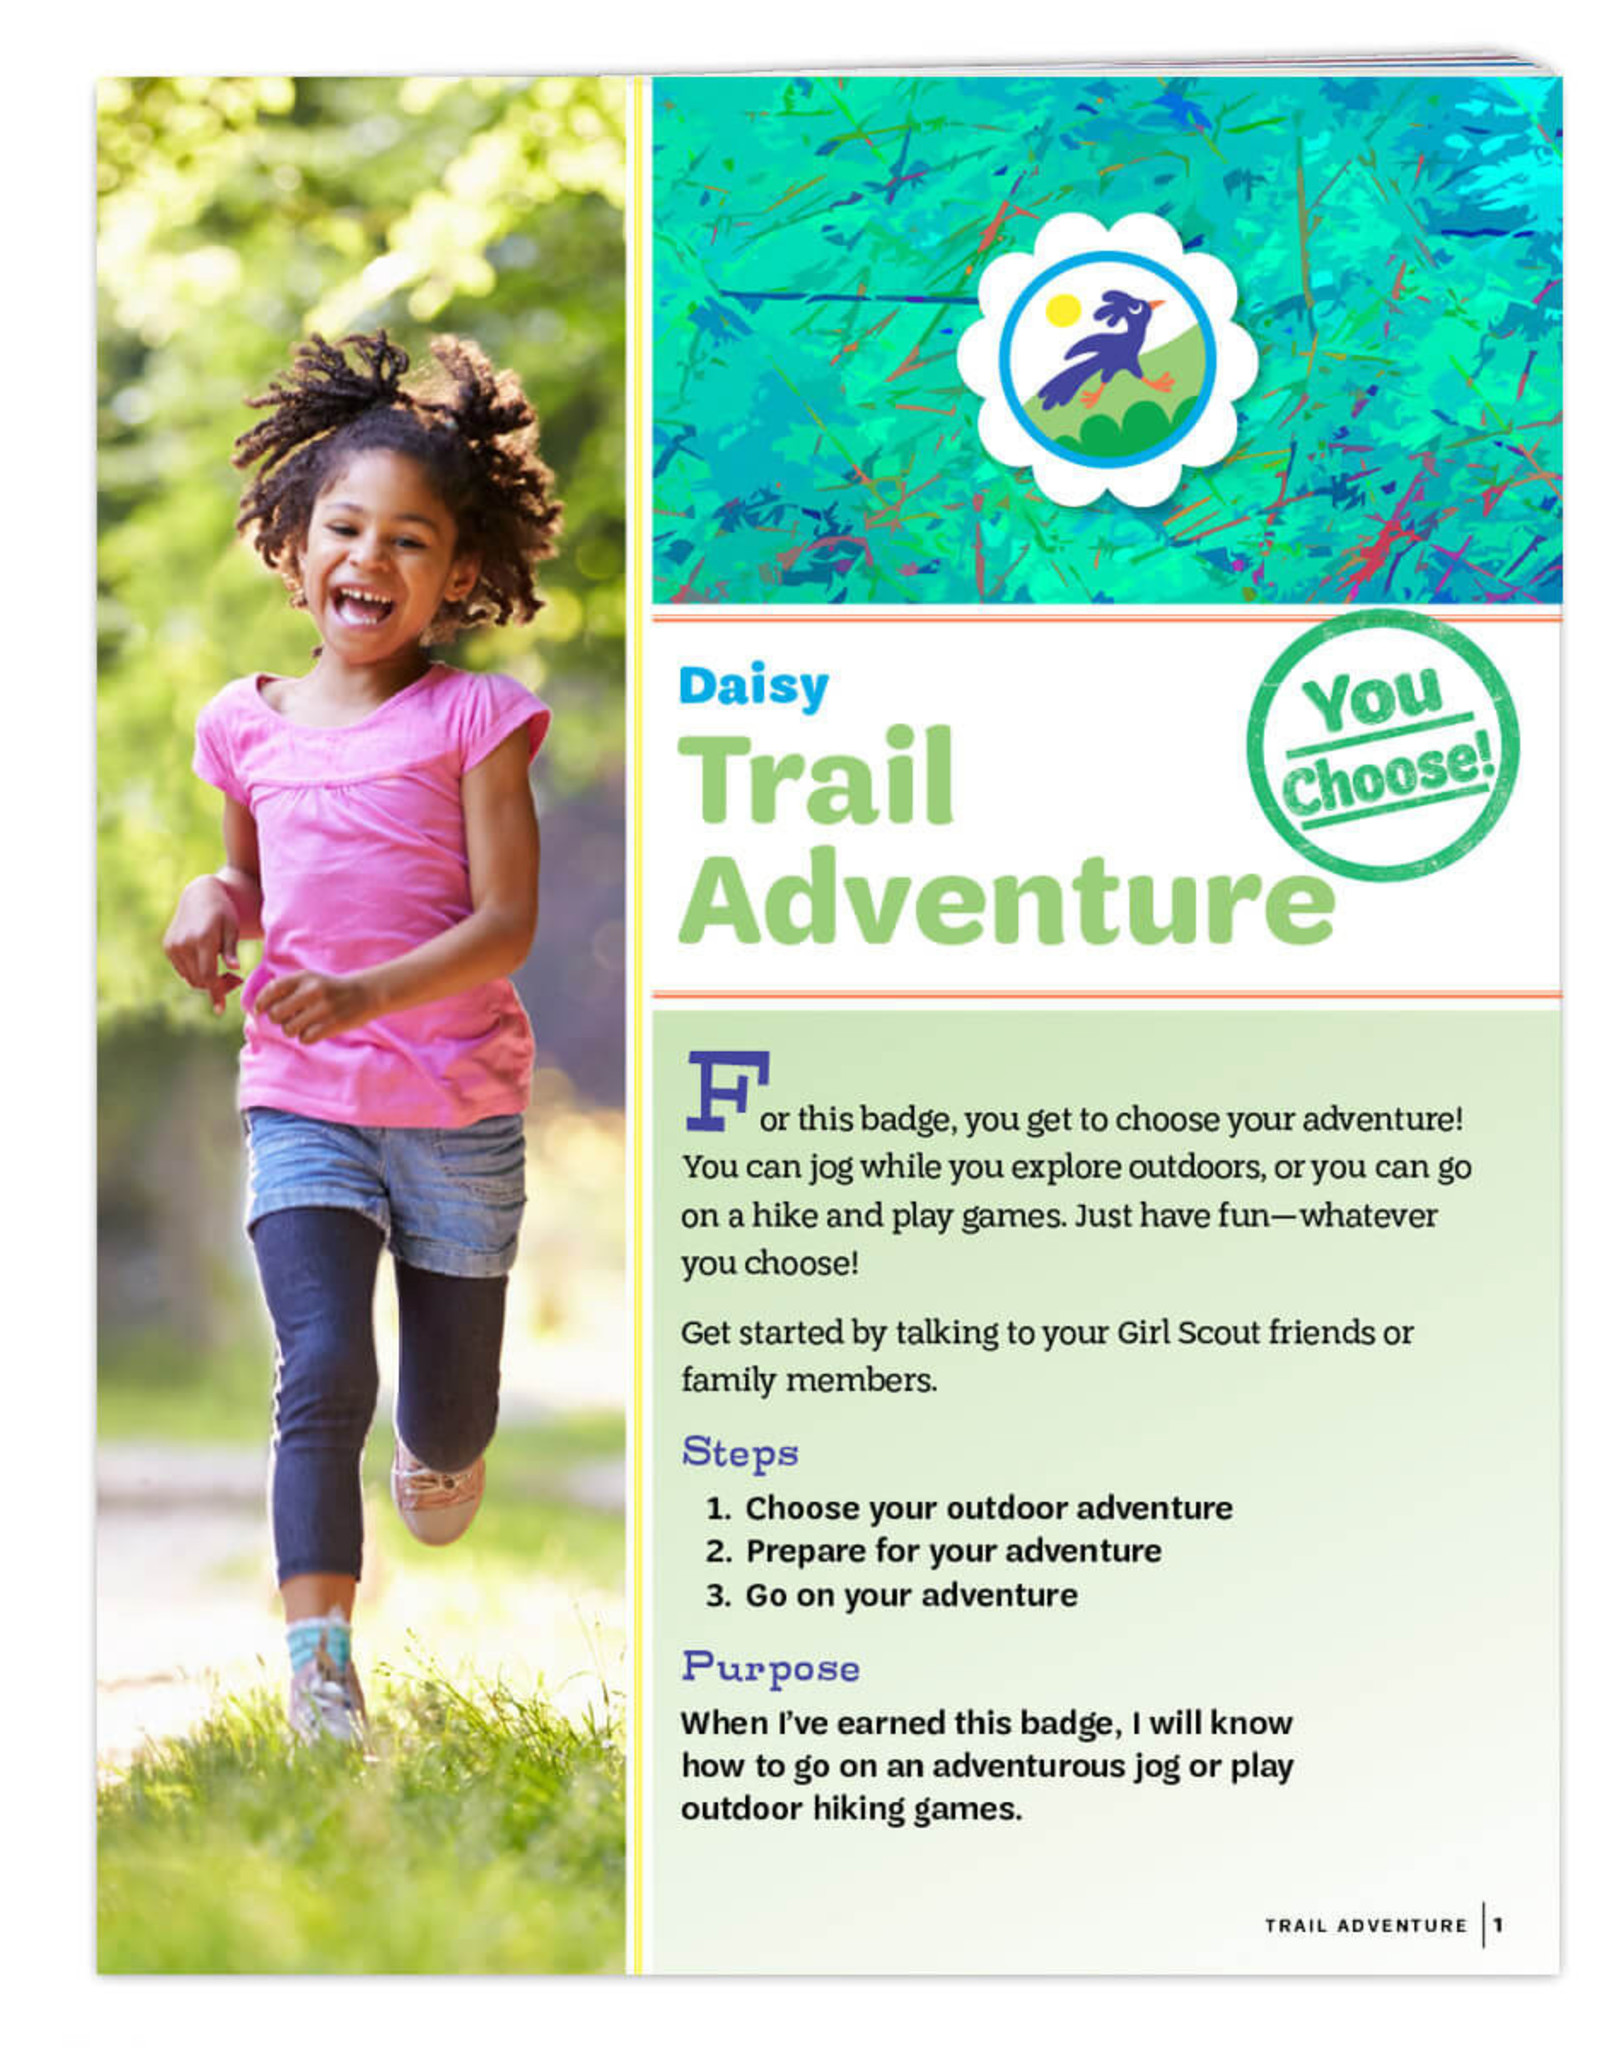 GIRL SCOUTS OF THE USA Daisy Trail Adventure Requirements Pamphlet